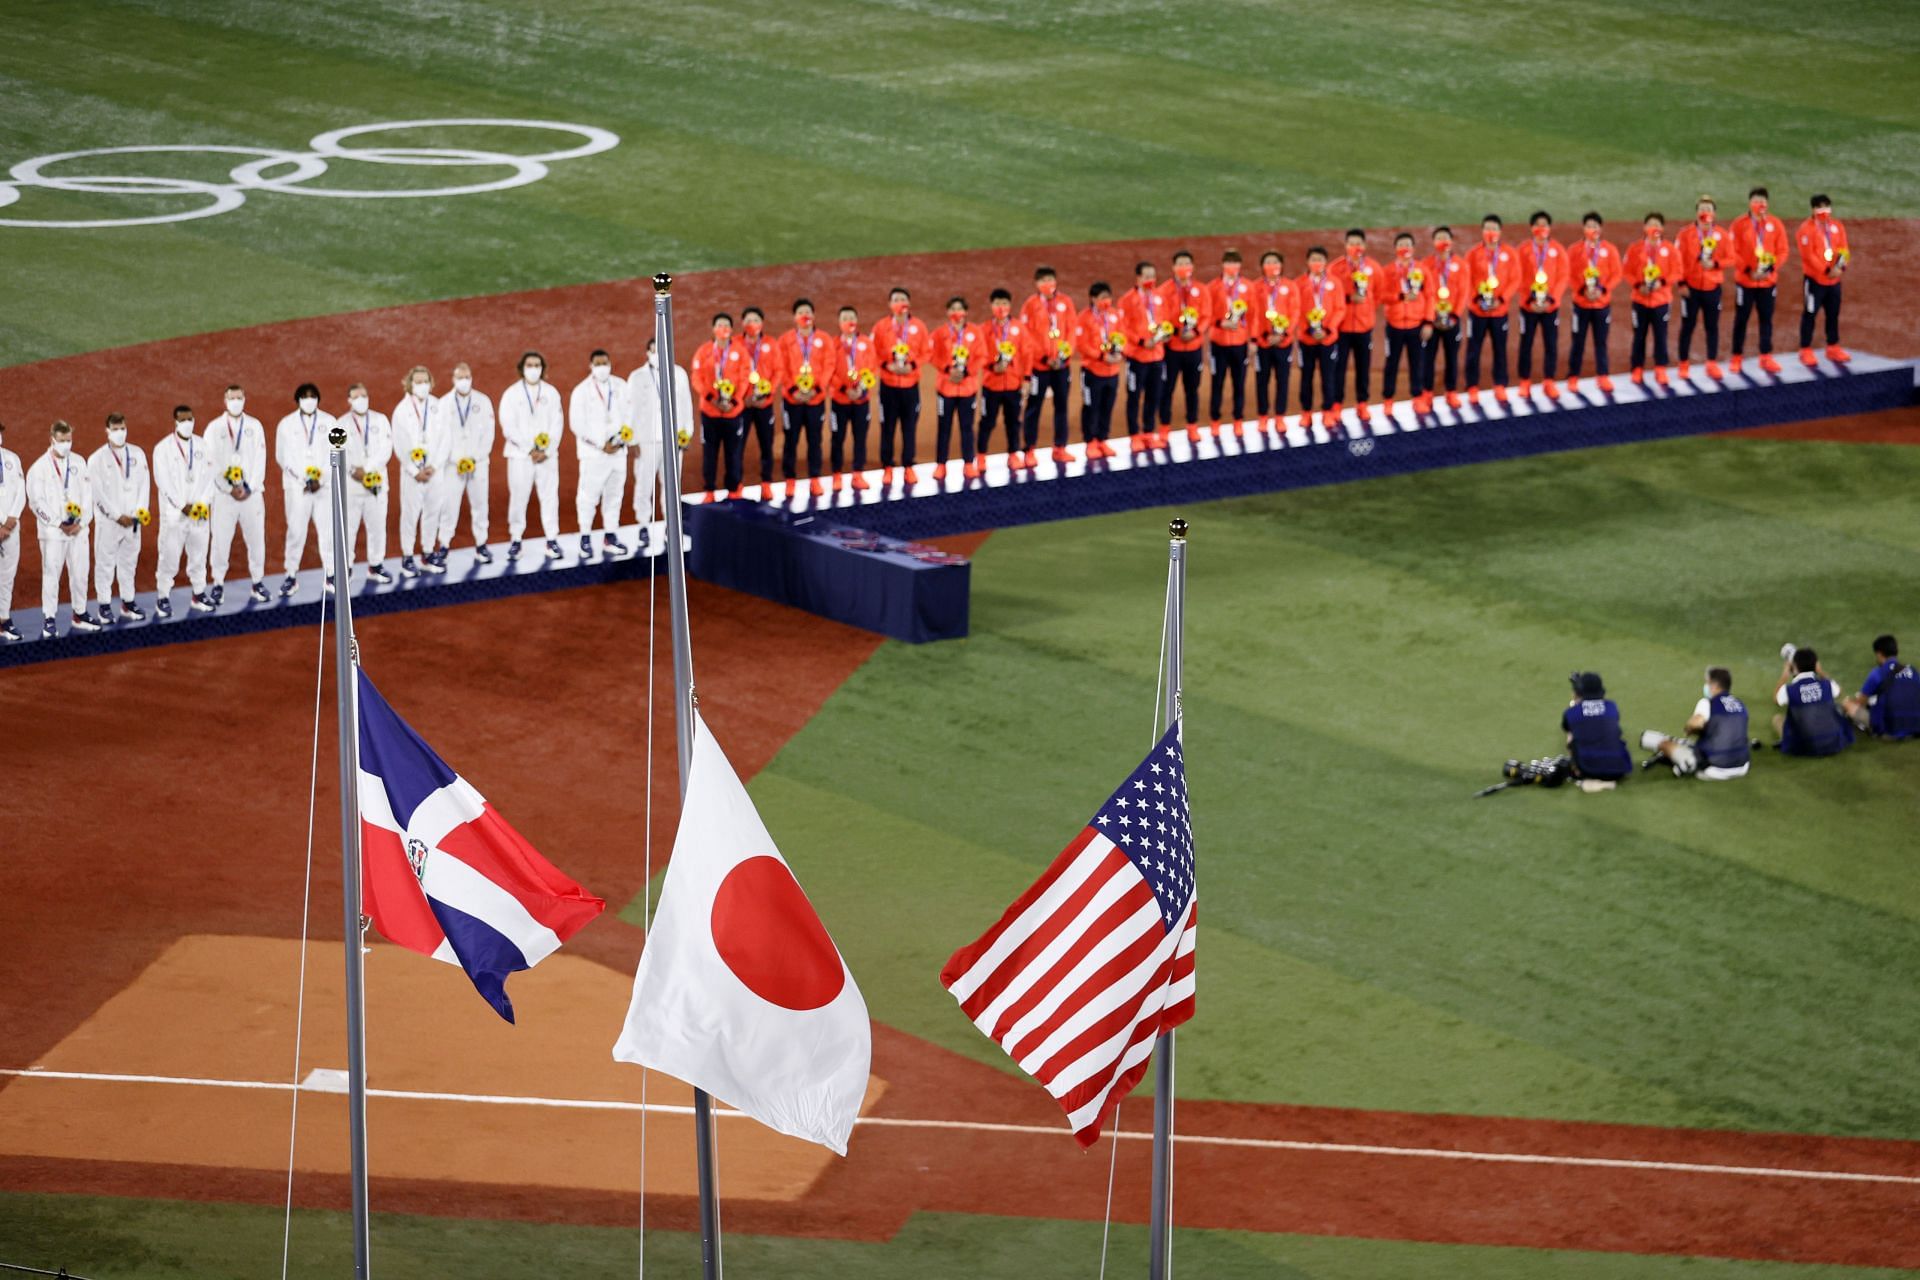 World Baseball Classic on X: The lineups for the